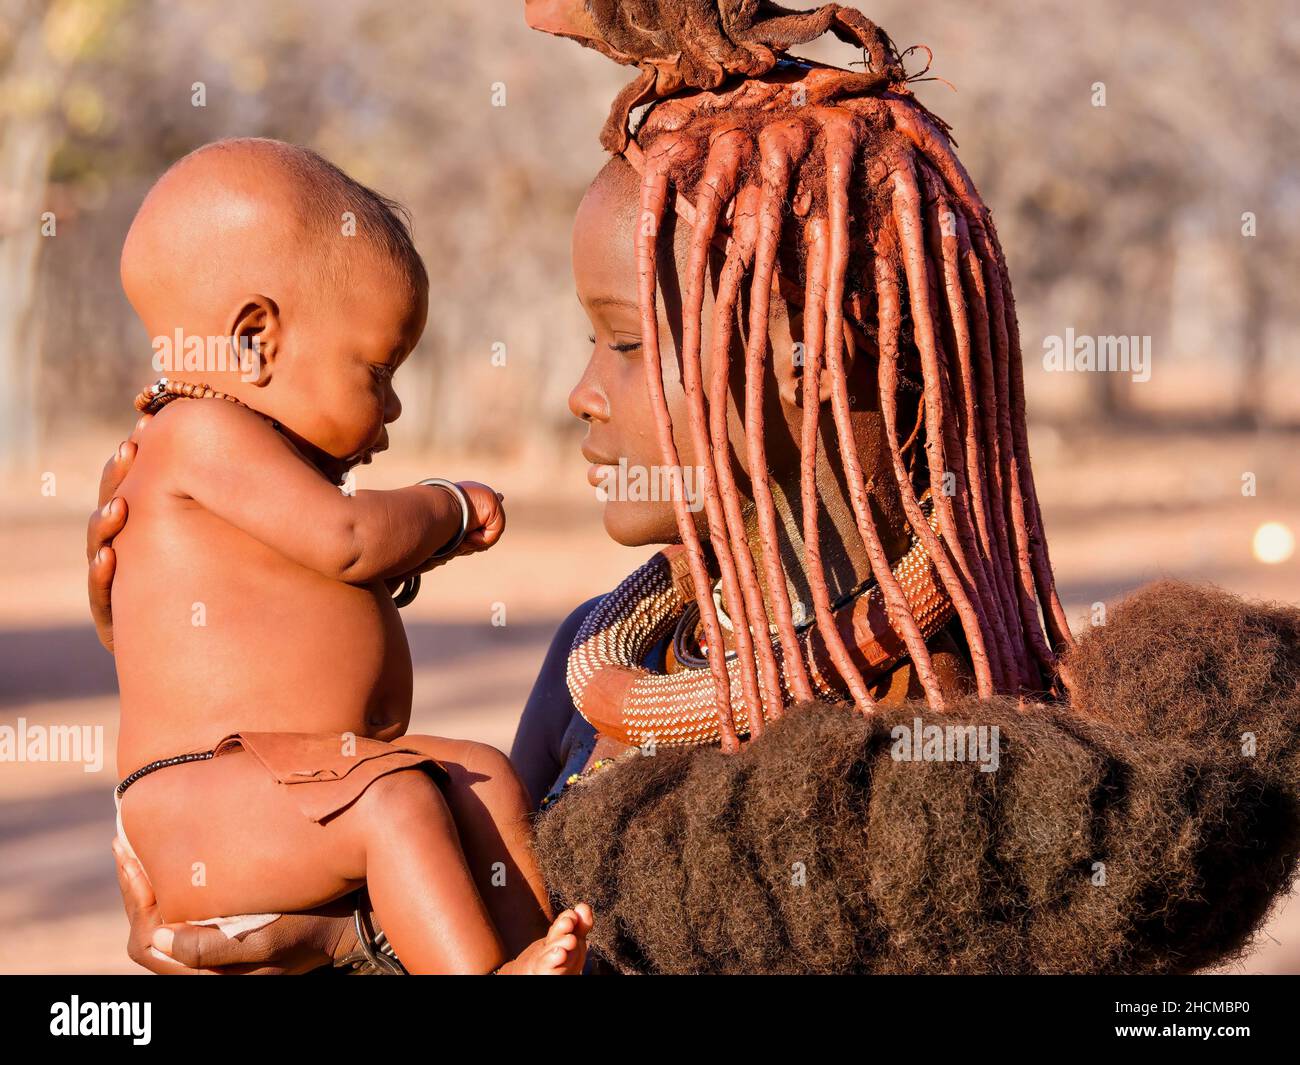 Palmwag, Namibia - August 21, 2016. A young African woman holds her baby while wearing the traditional hairstyle and ochre skin paste of the Himba tri Stock Photo